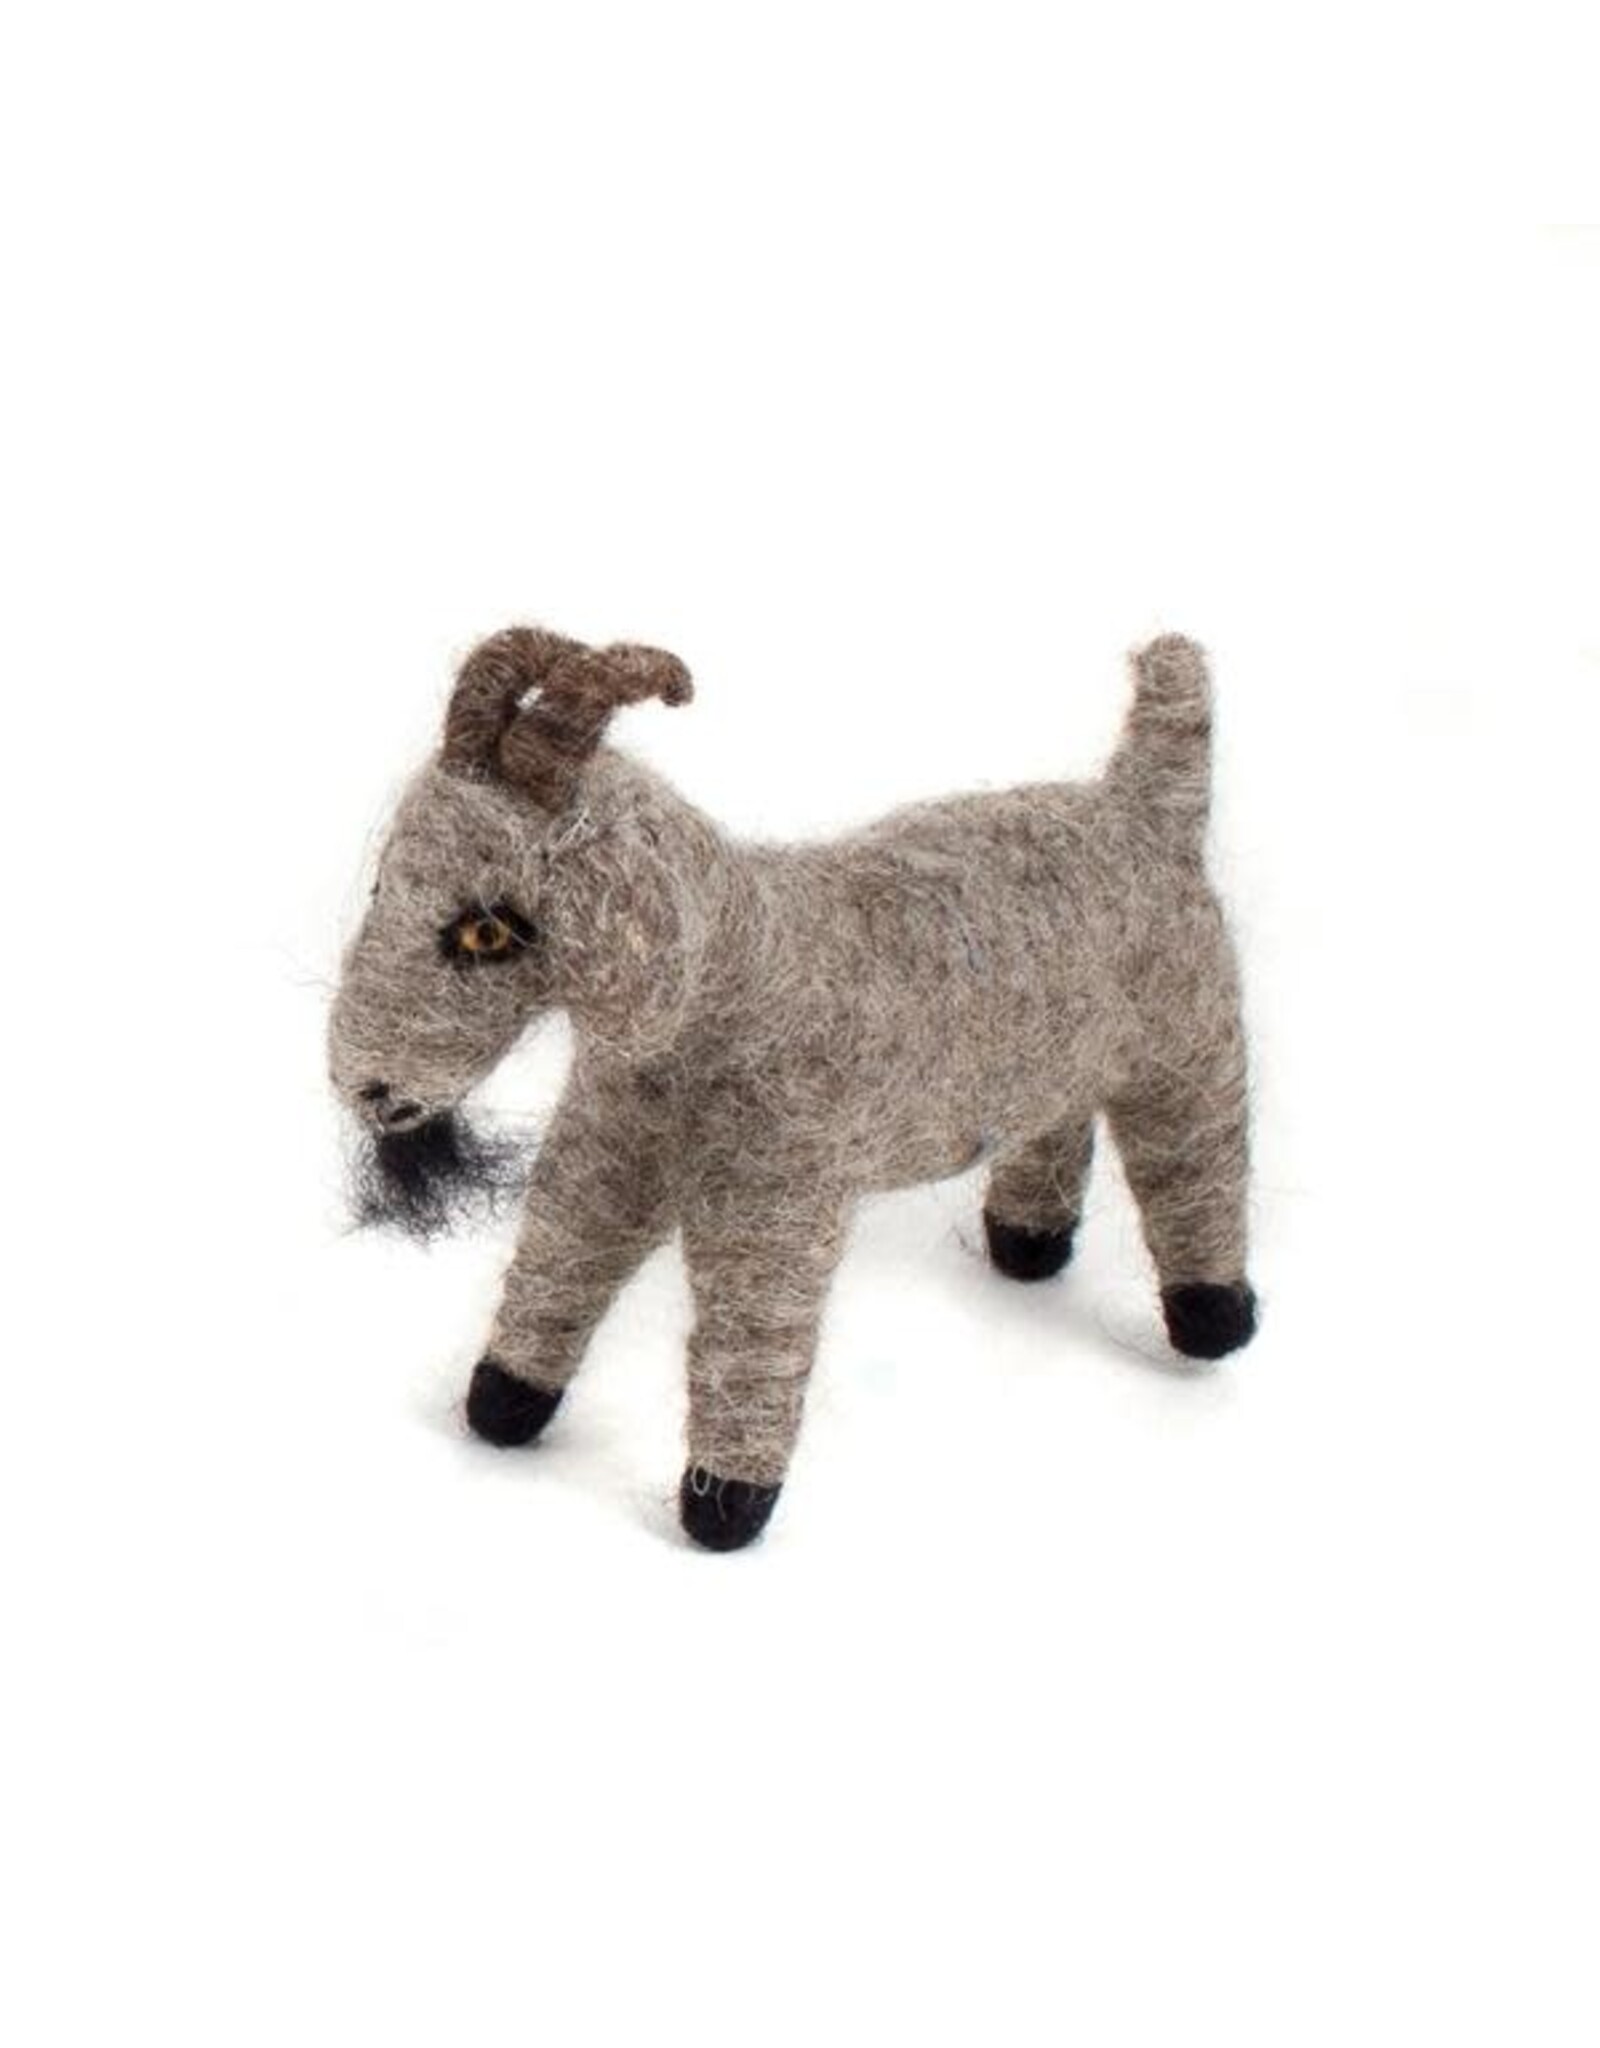 Trade roots Guatemala, Felted Wool Animals